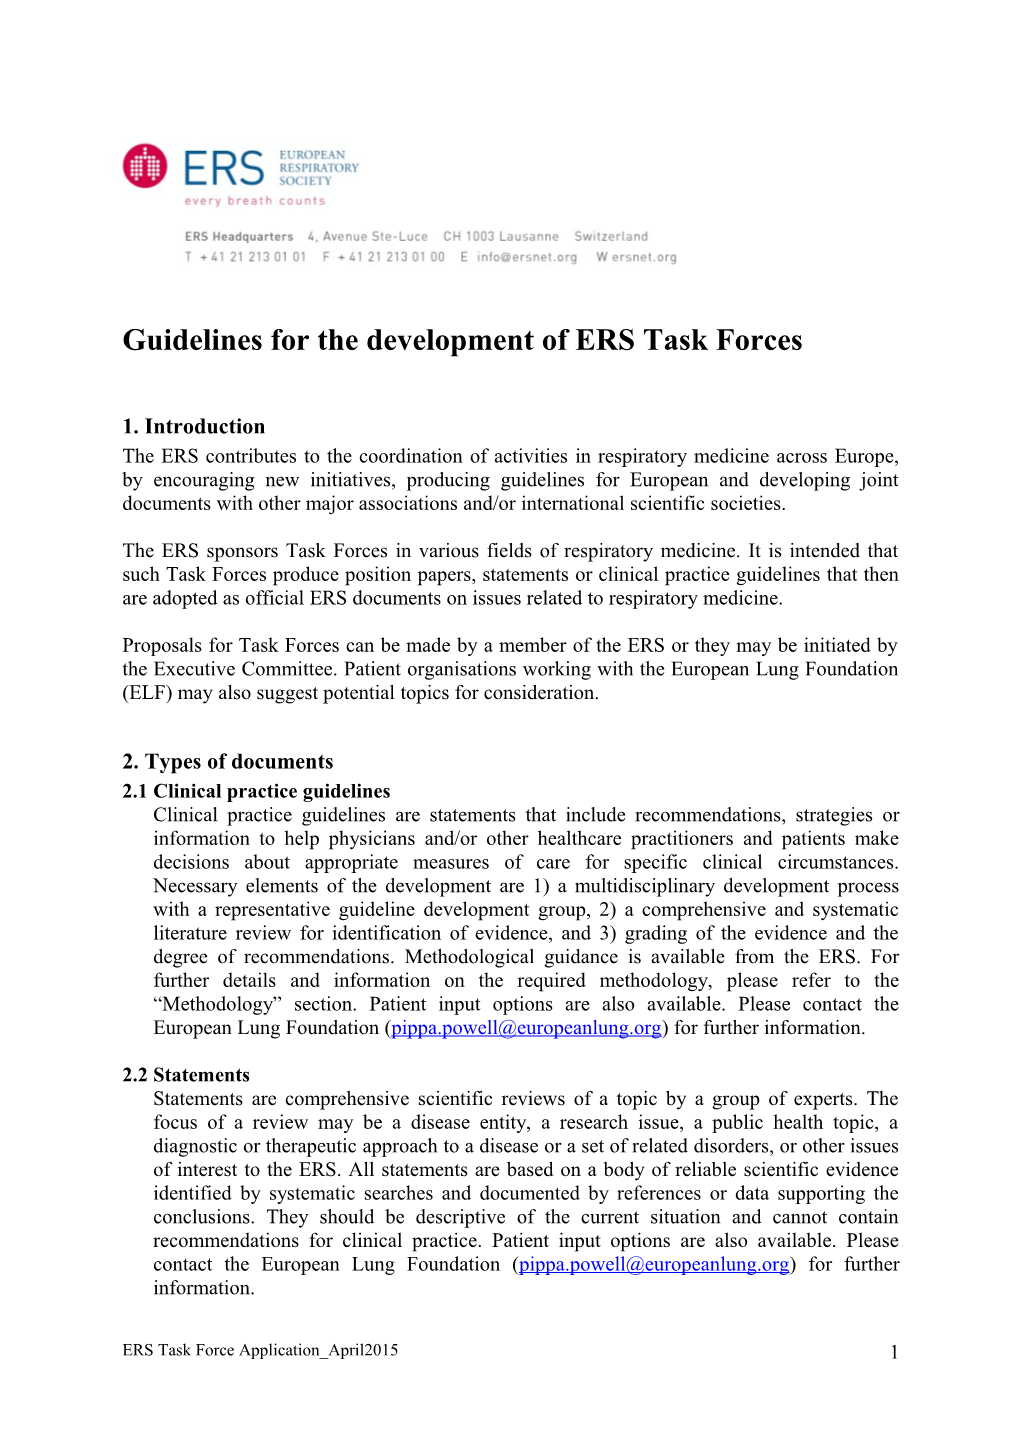 Guidelines for the Development of ERS Task Forces